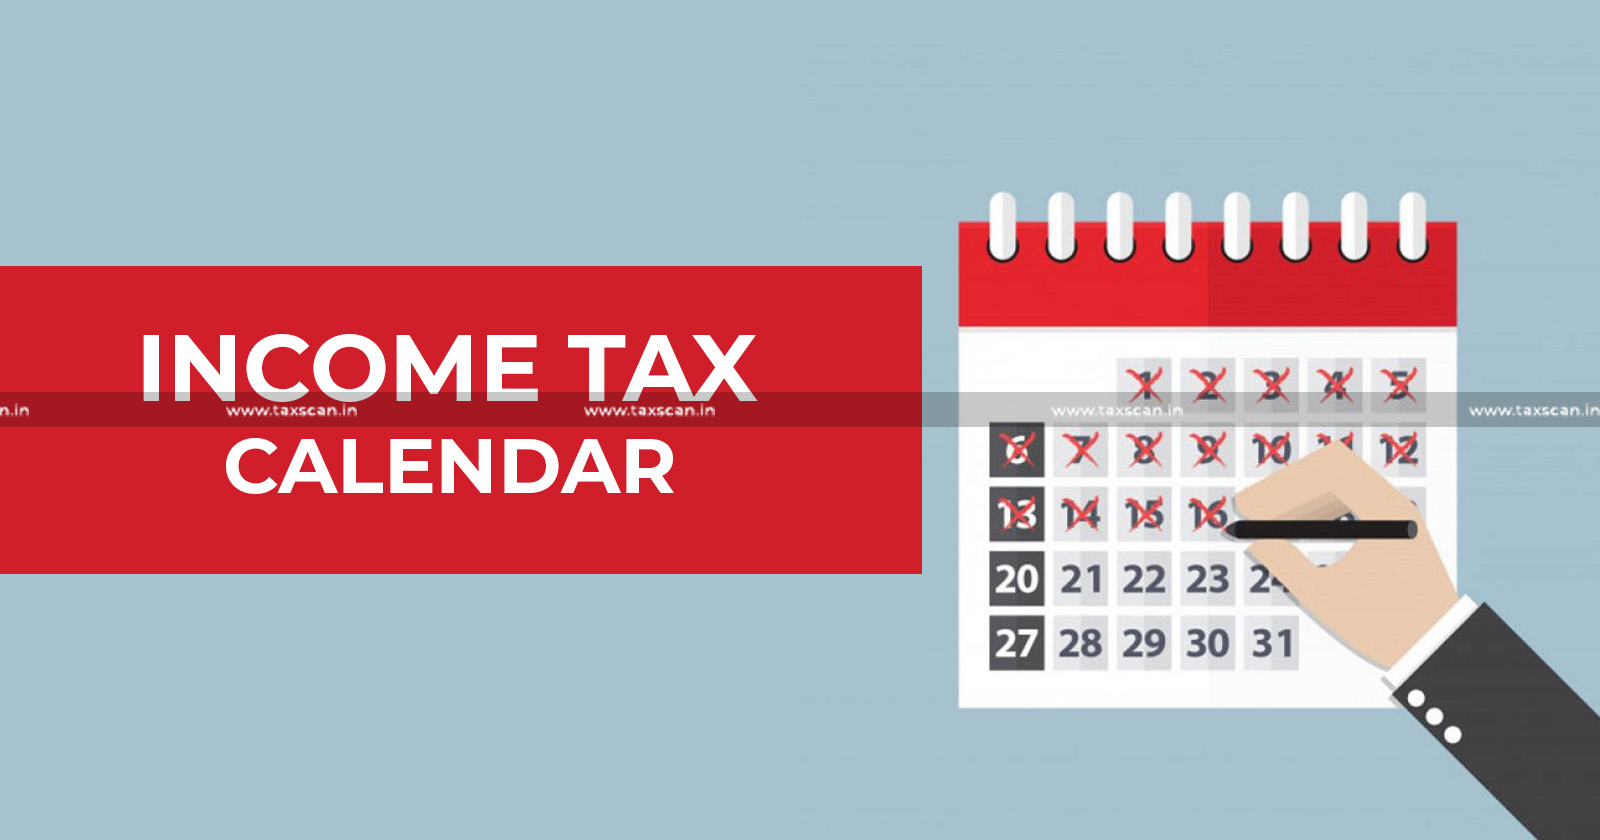 Tax due dates Not to Miss in August